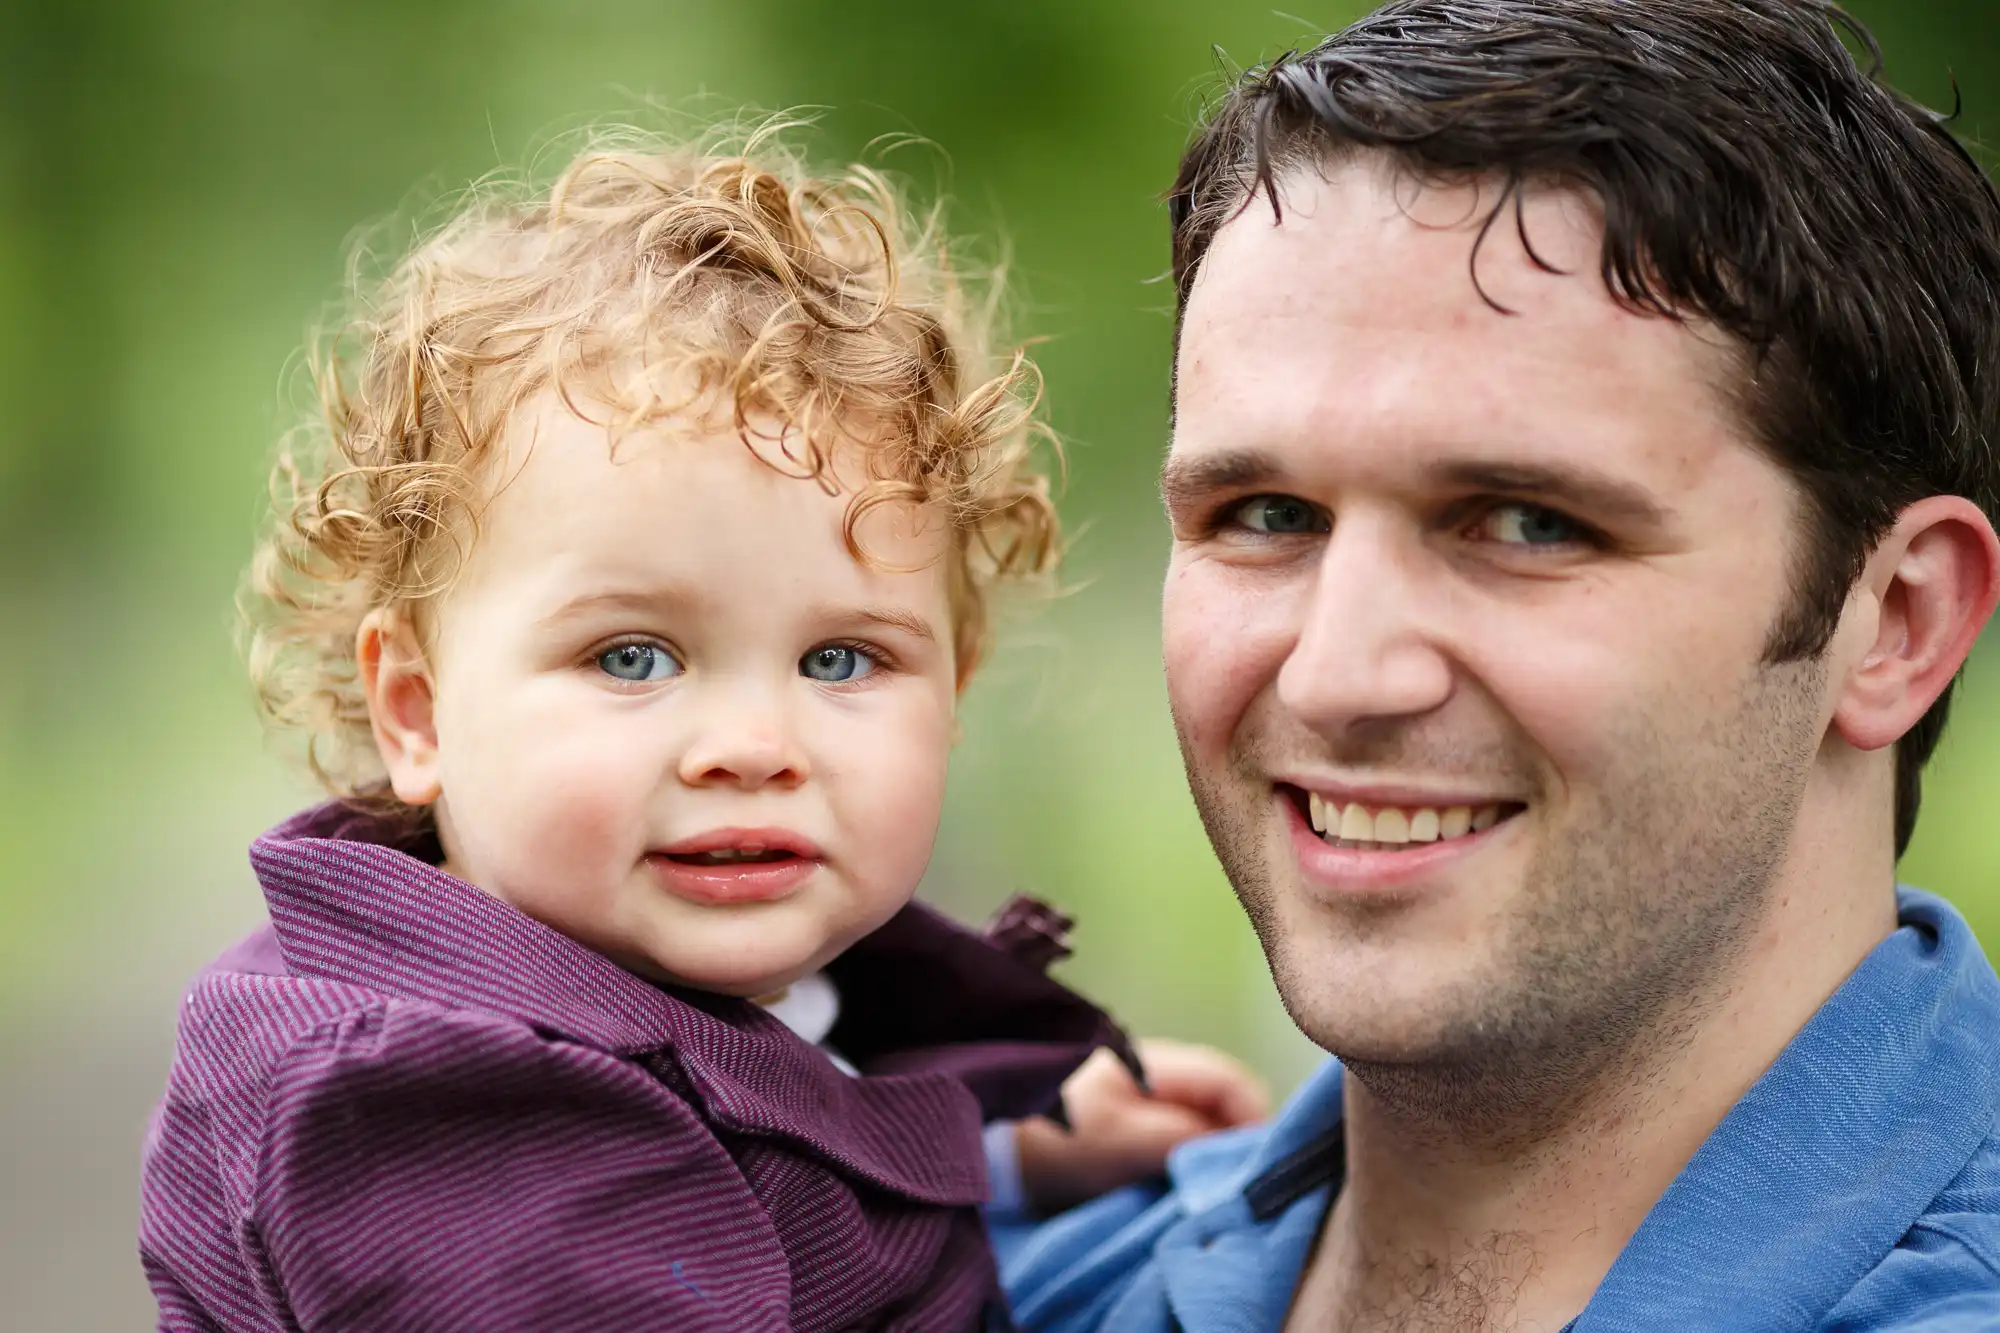 A father holding his toddler with curly hair, both smiling slightly, outdoors with a blurred green background.